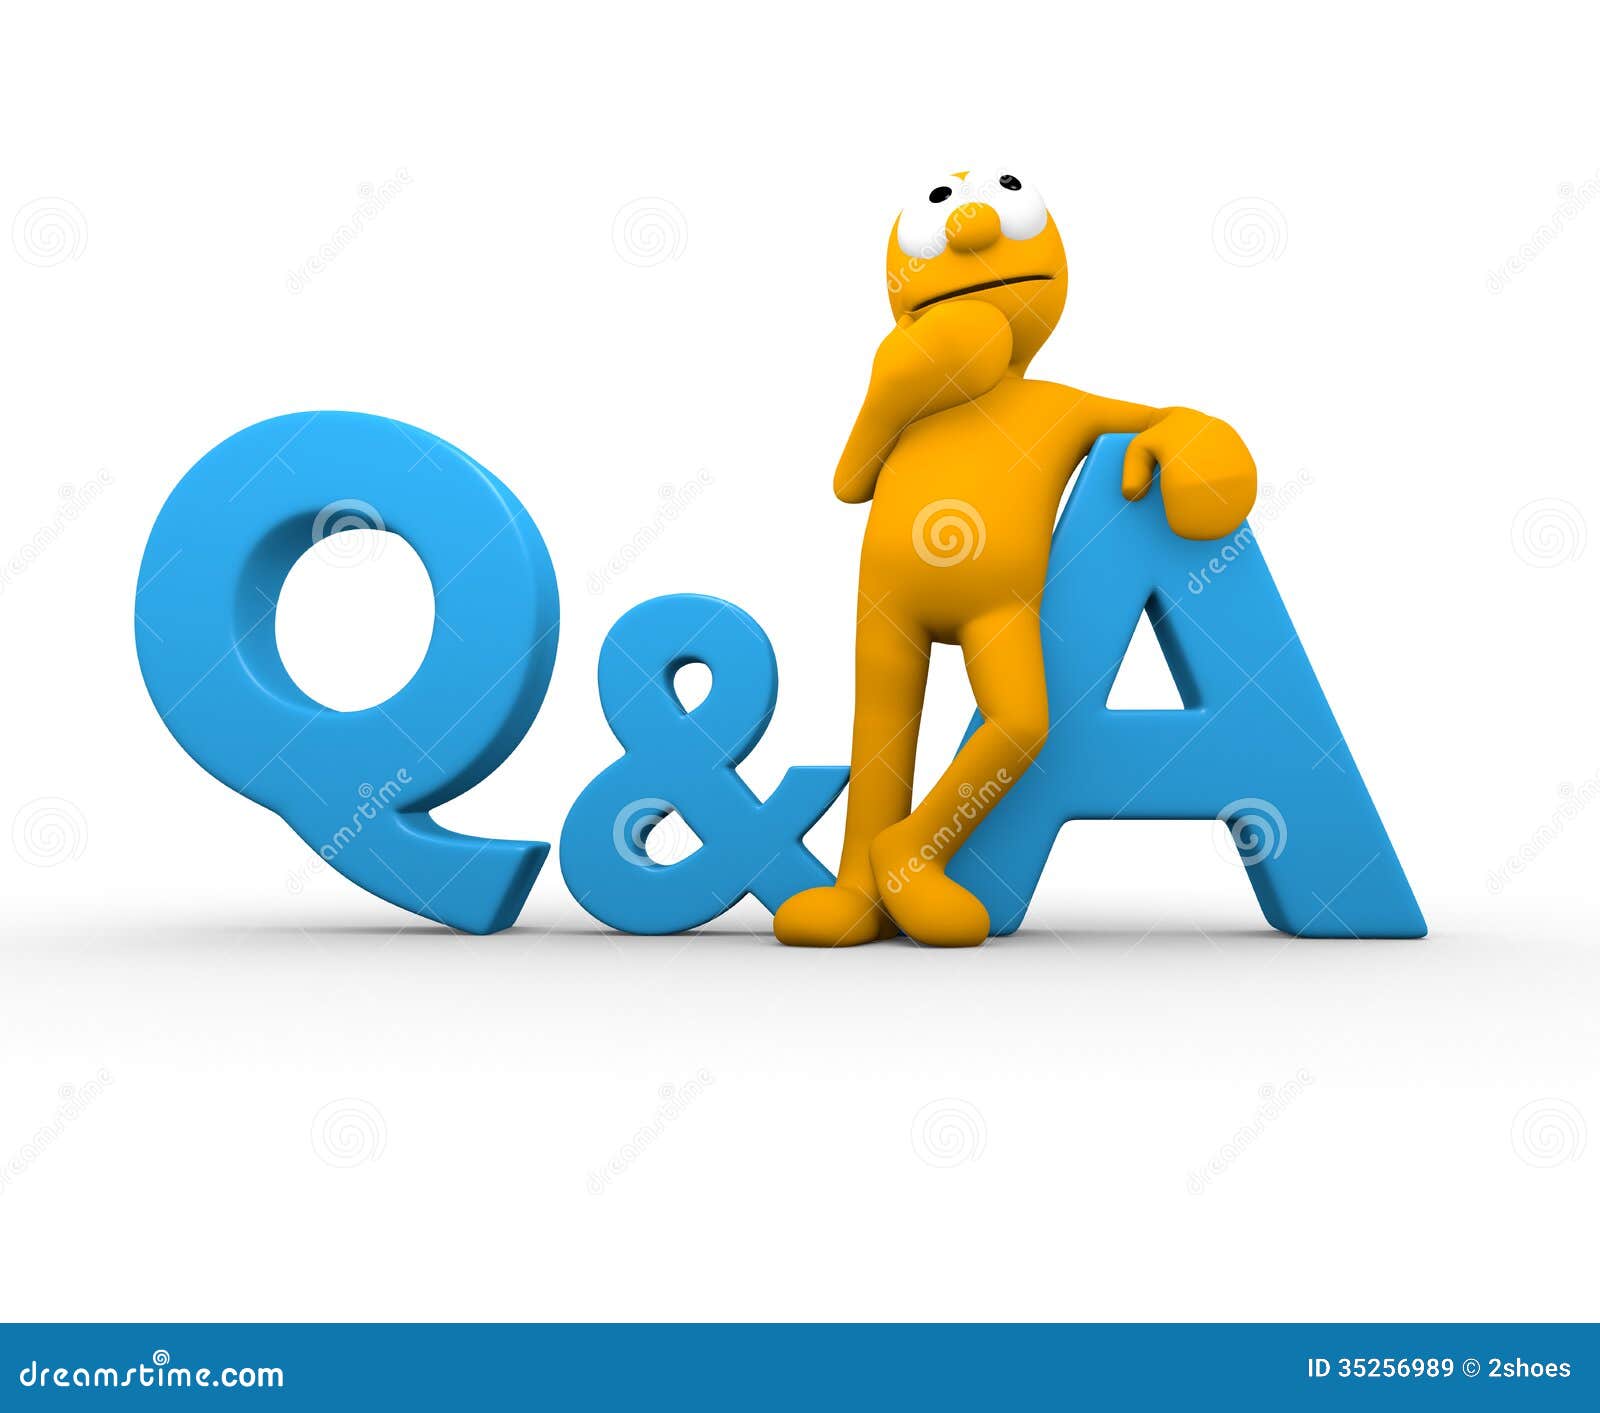 question and answer clipart - photo #8